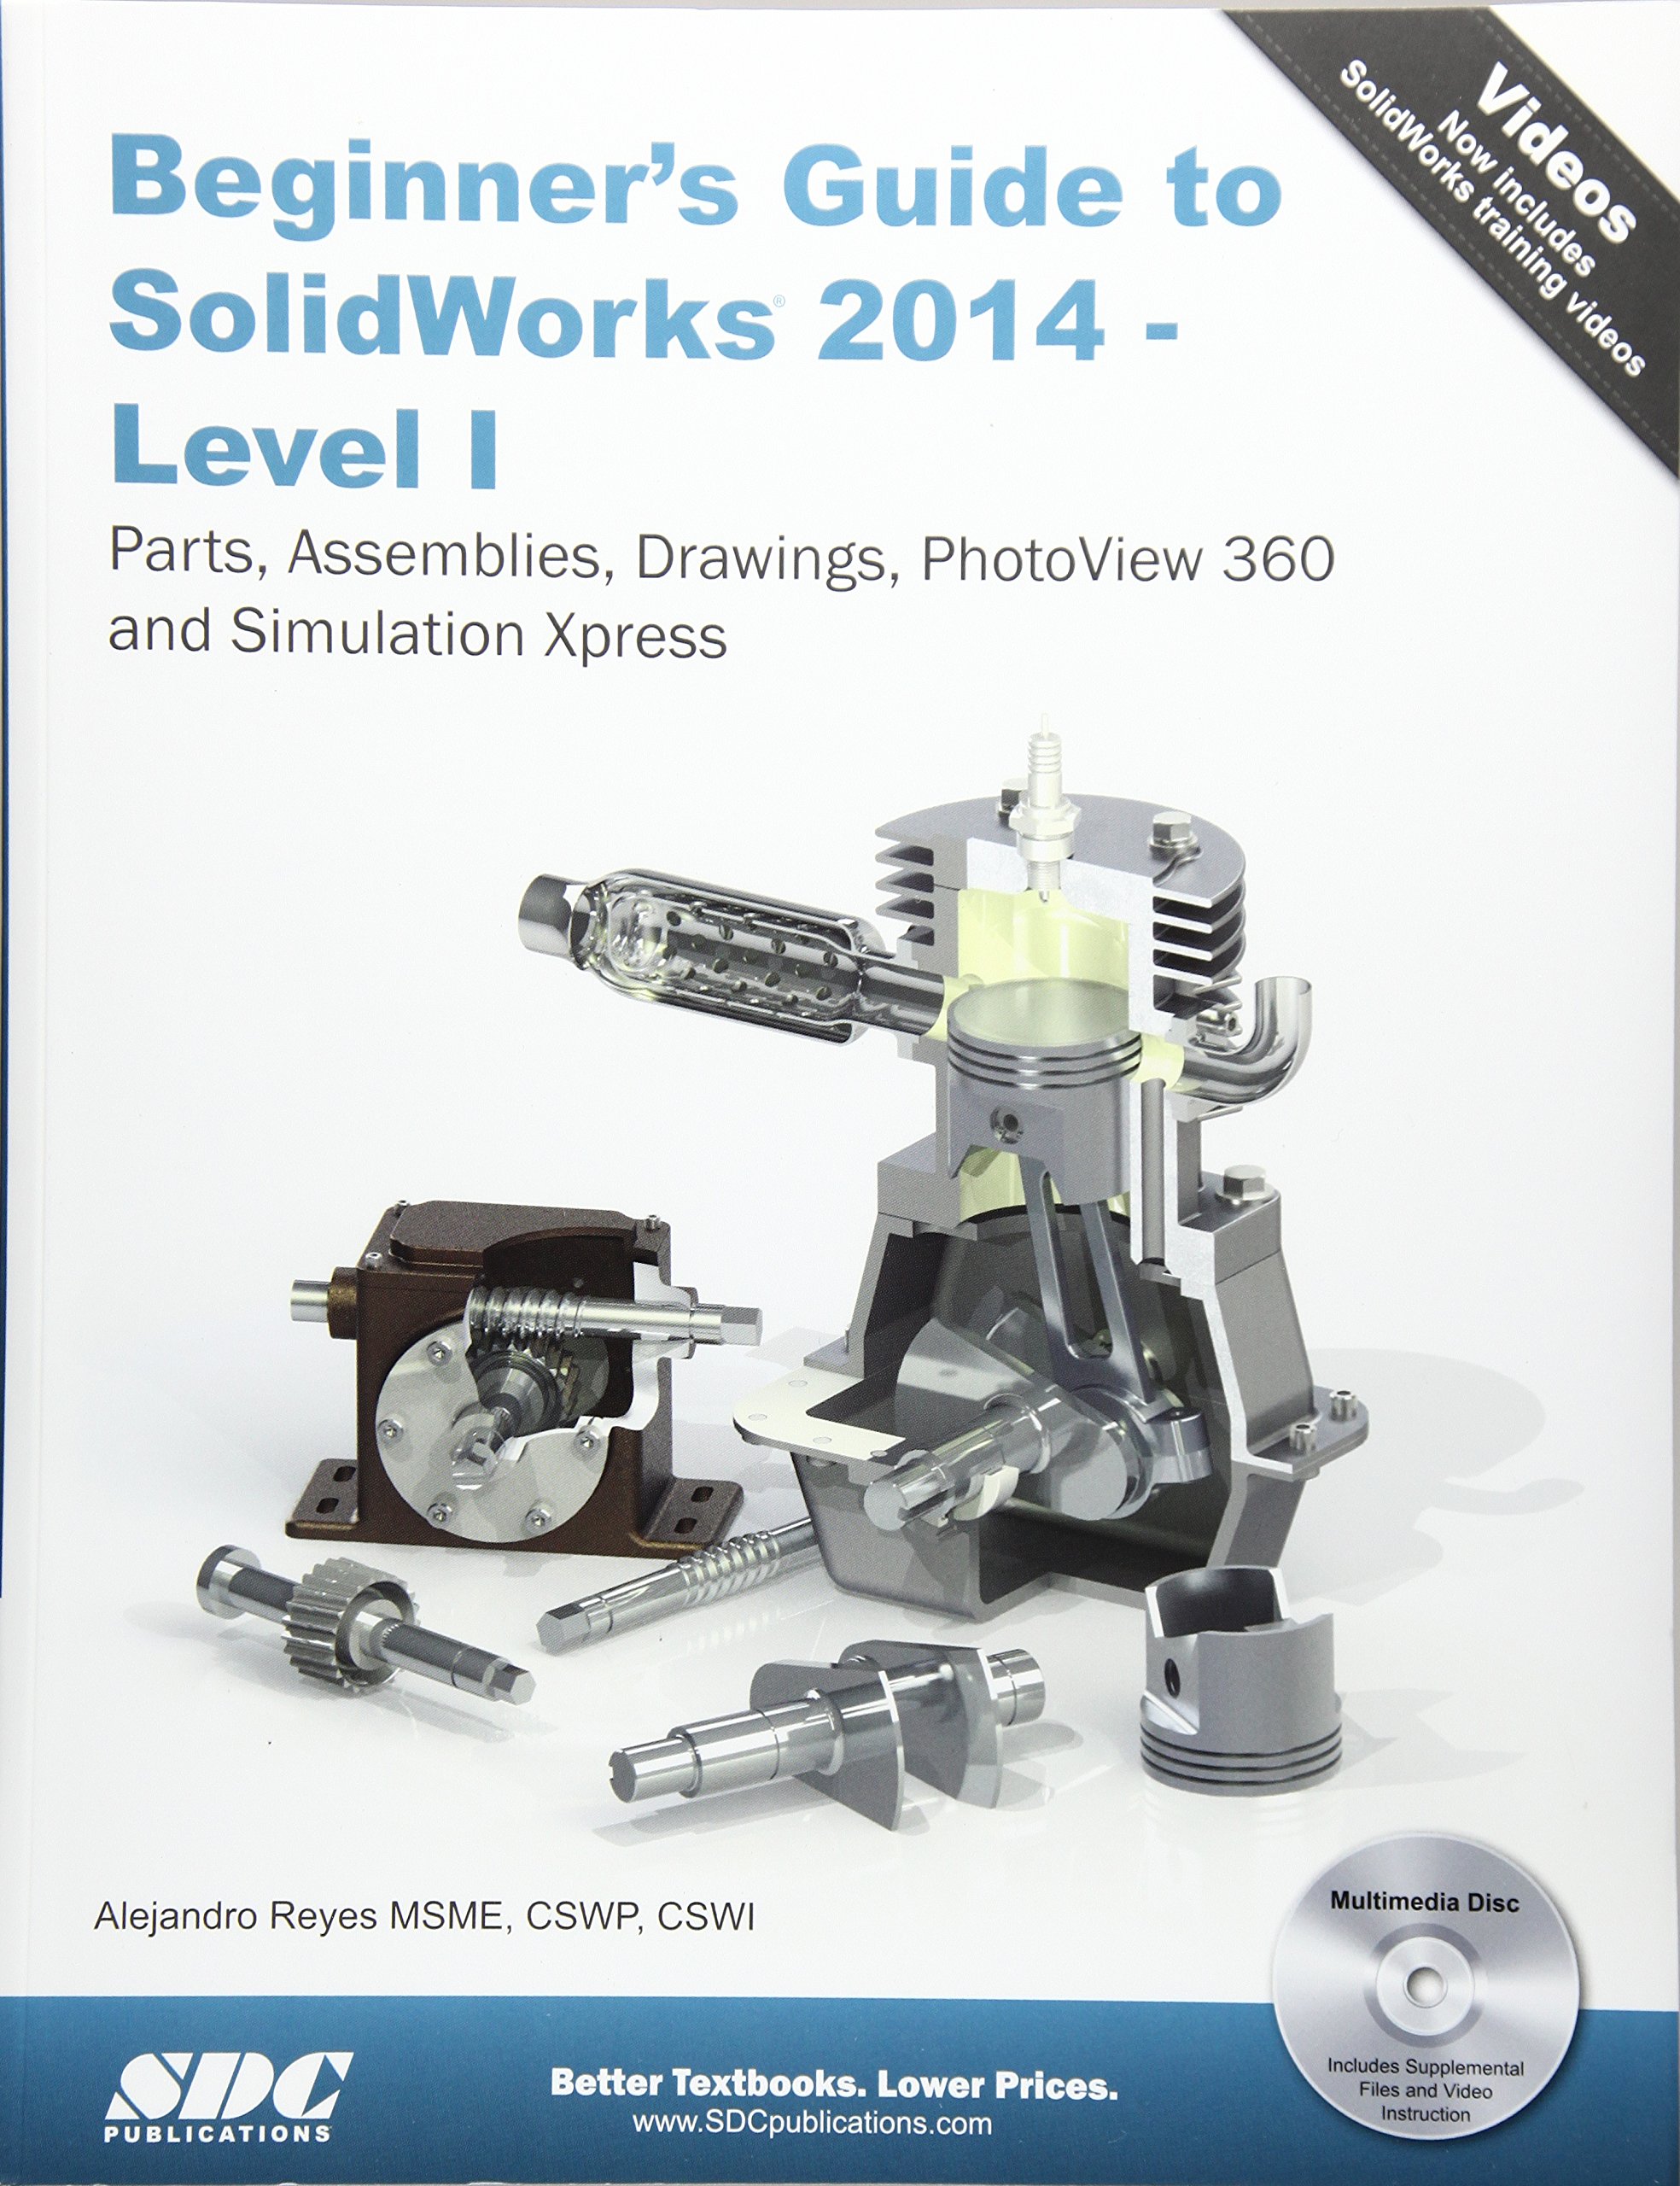 solidworks software free download full version 2014